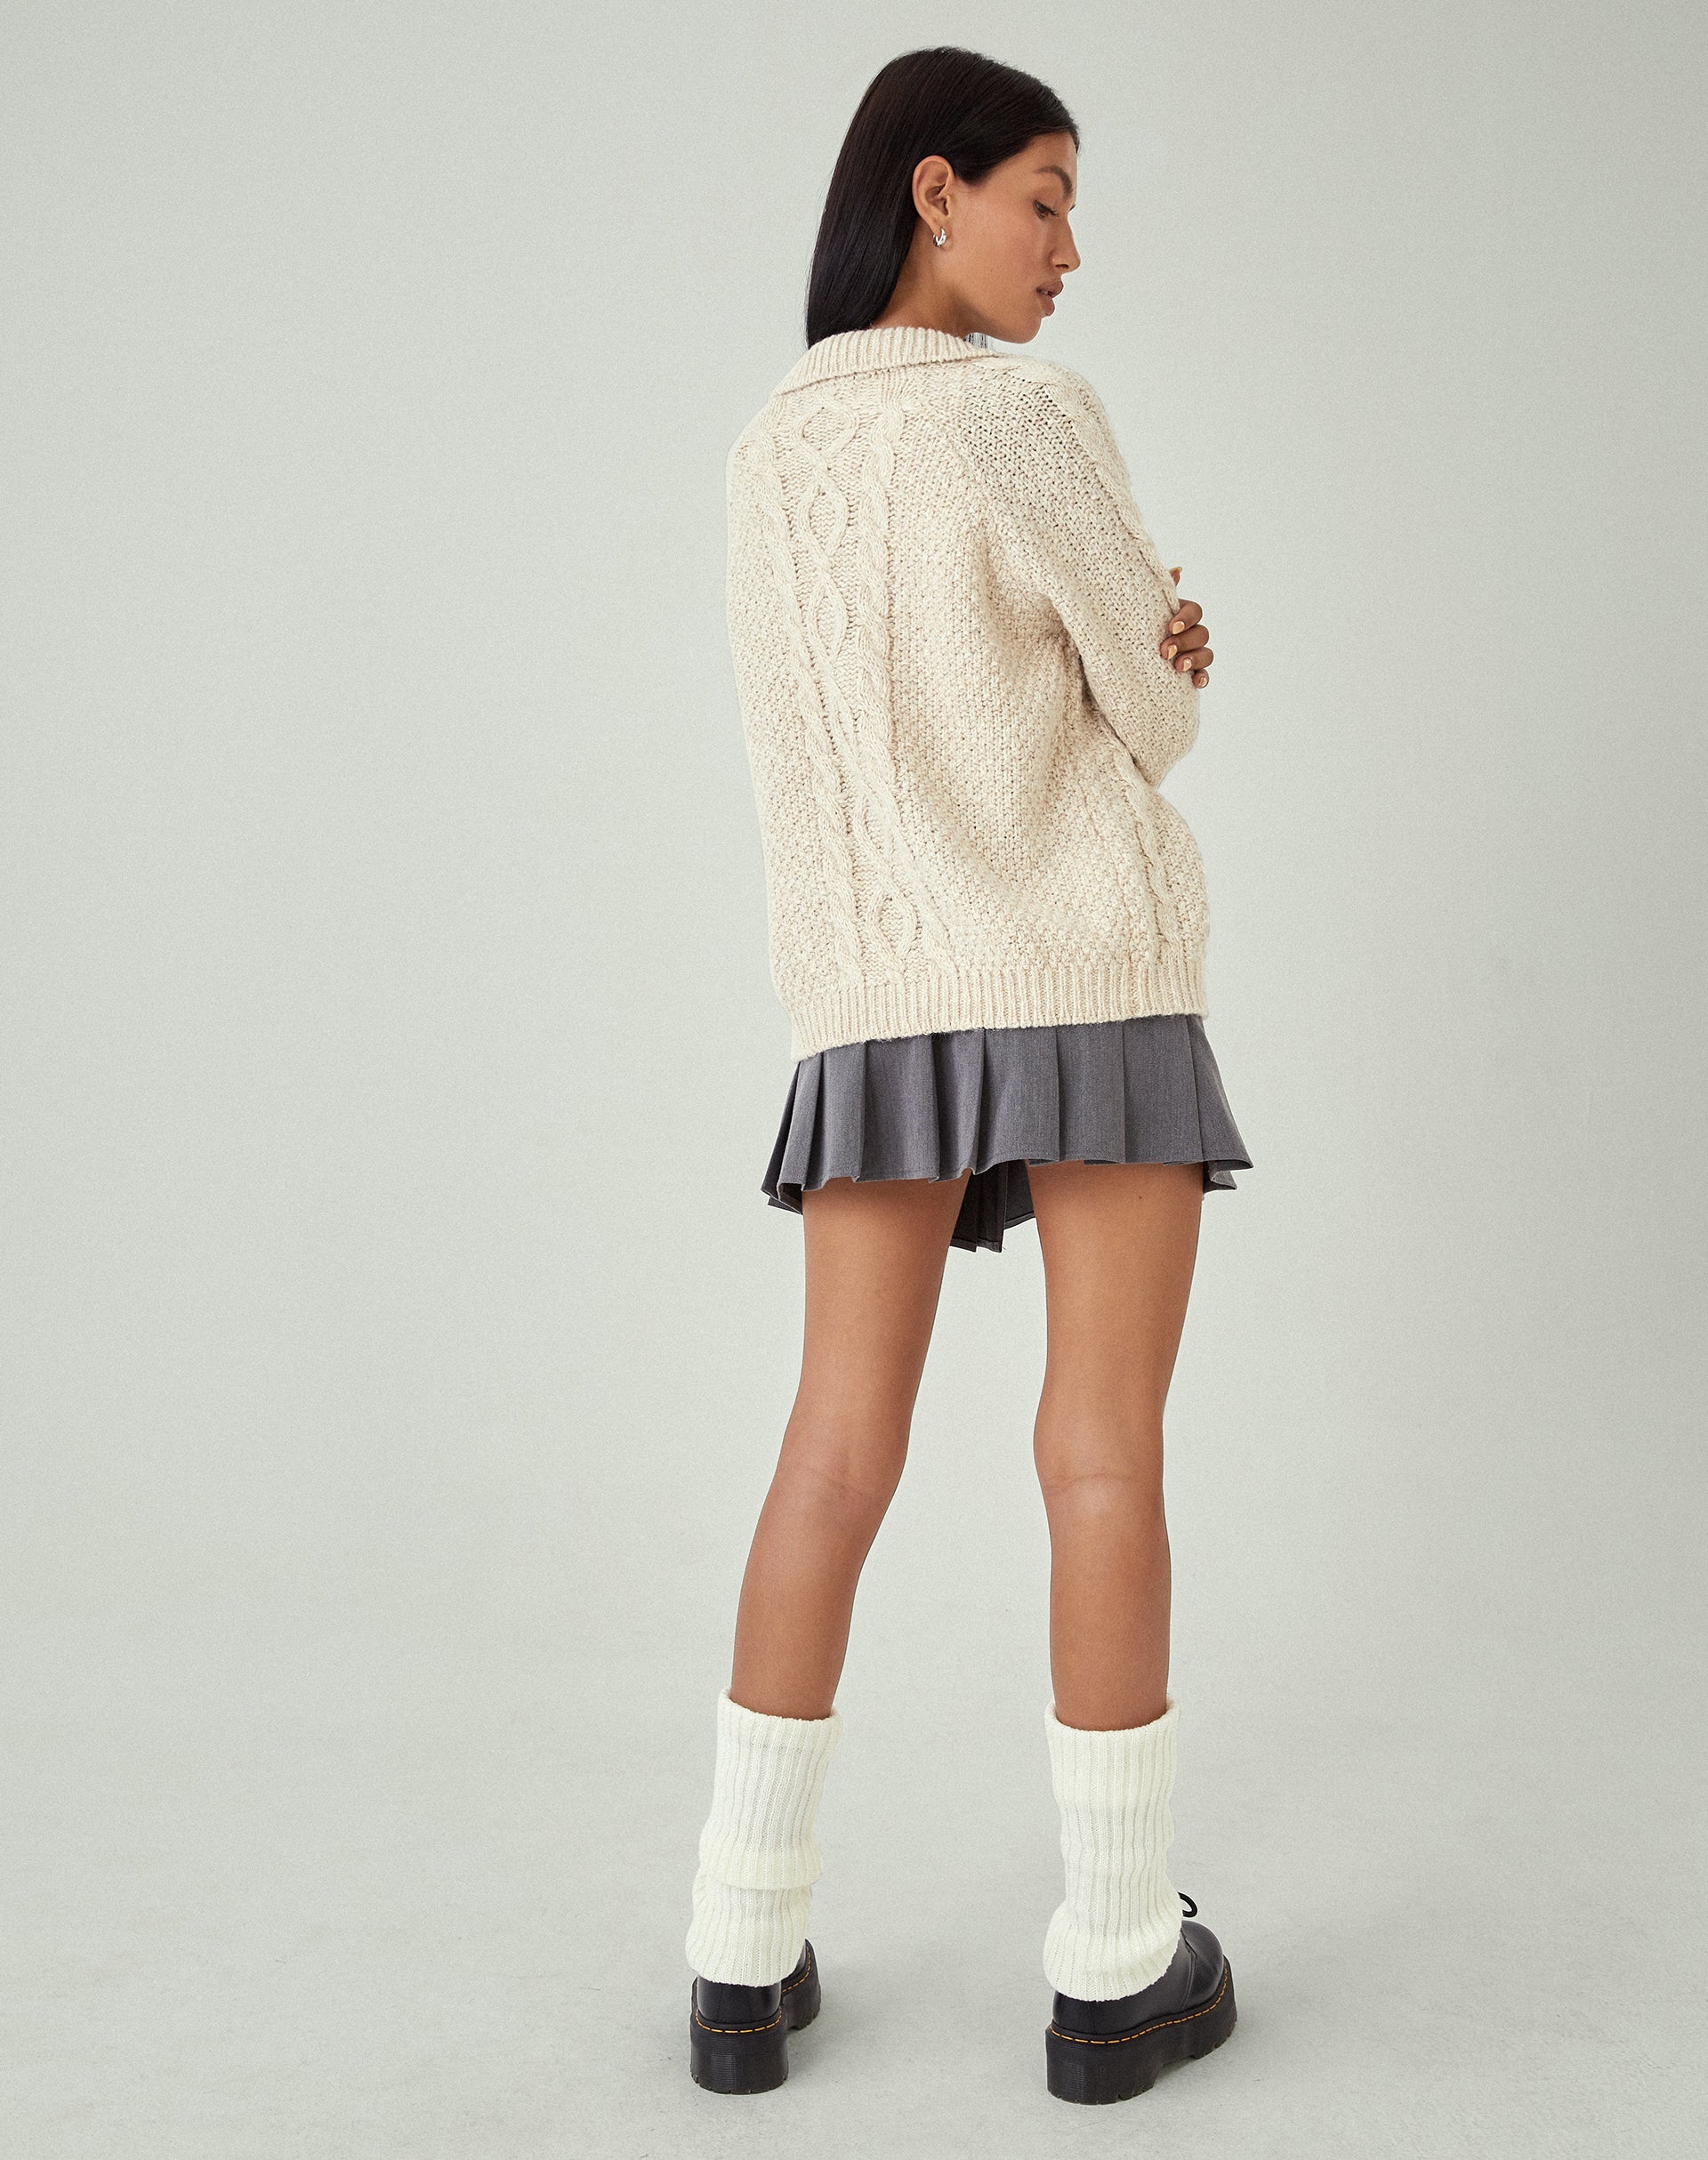 image of MOTEL X JACQUIE Triny Cardigan in Cable Knit Oatmeal